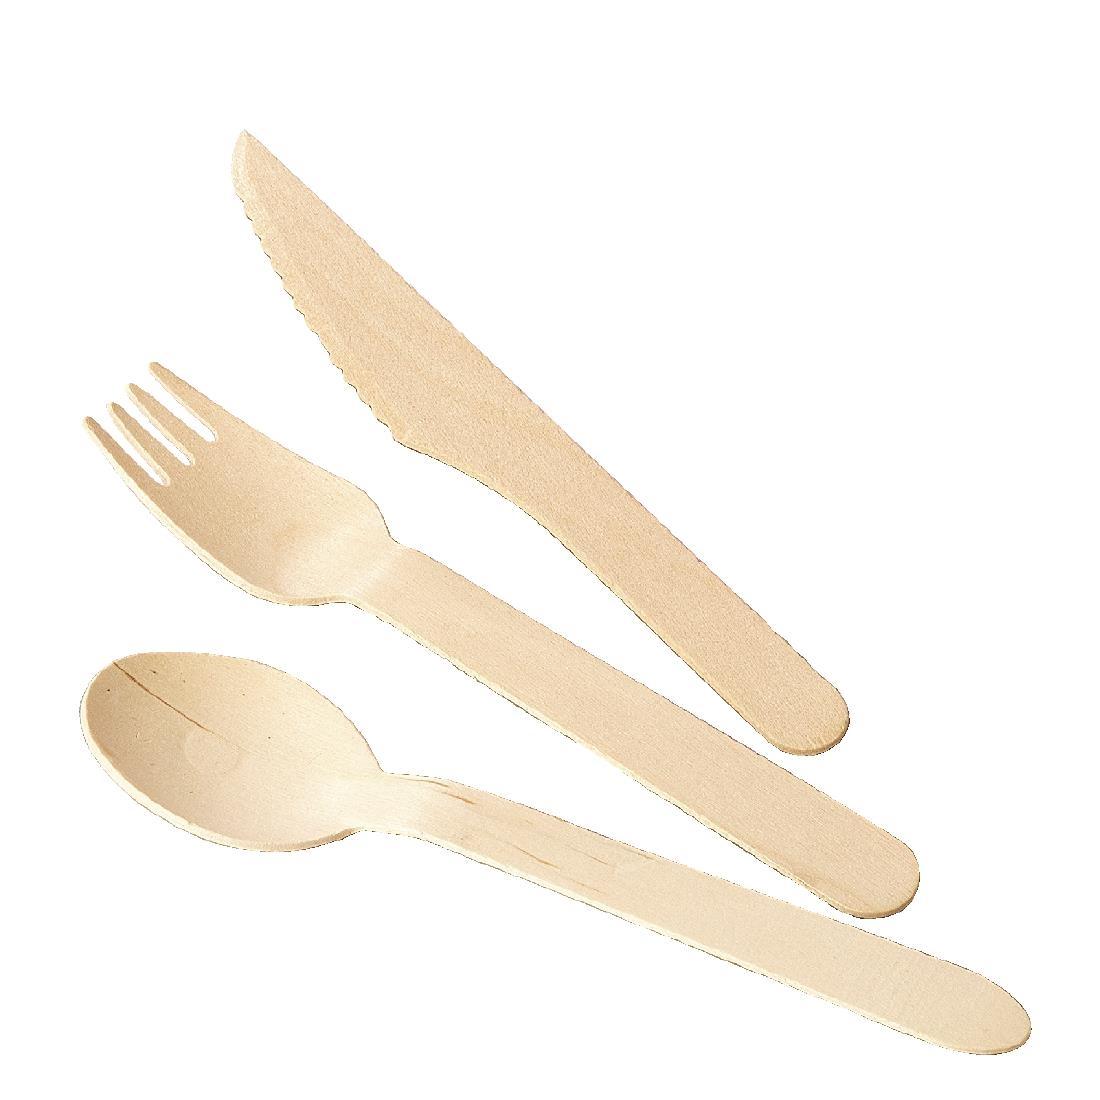 Fiesta Compostable Disposable Wooden Dessert Spoons (Pack of 100) - CD904  - 4